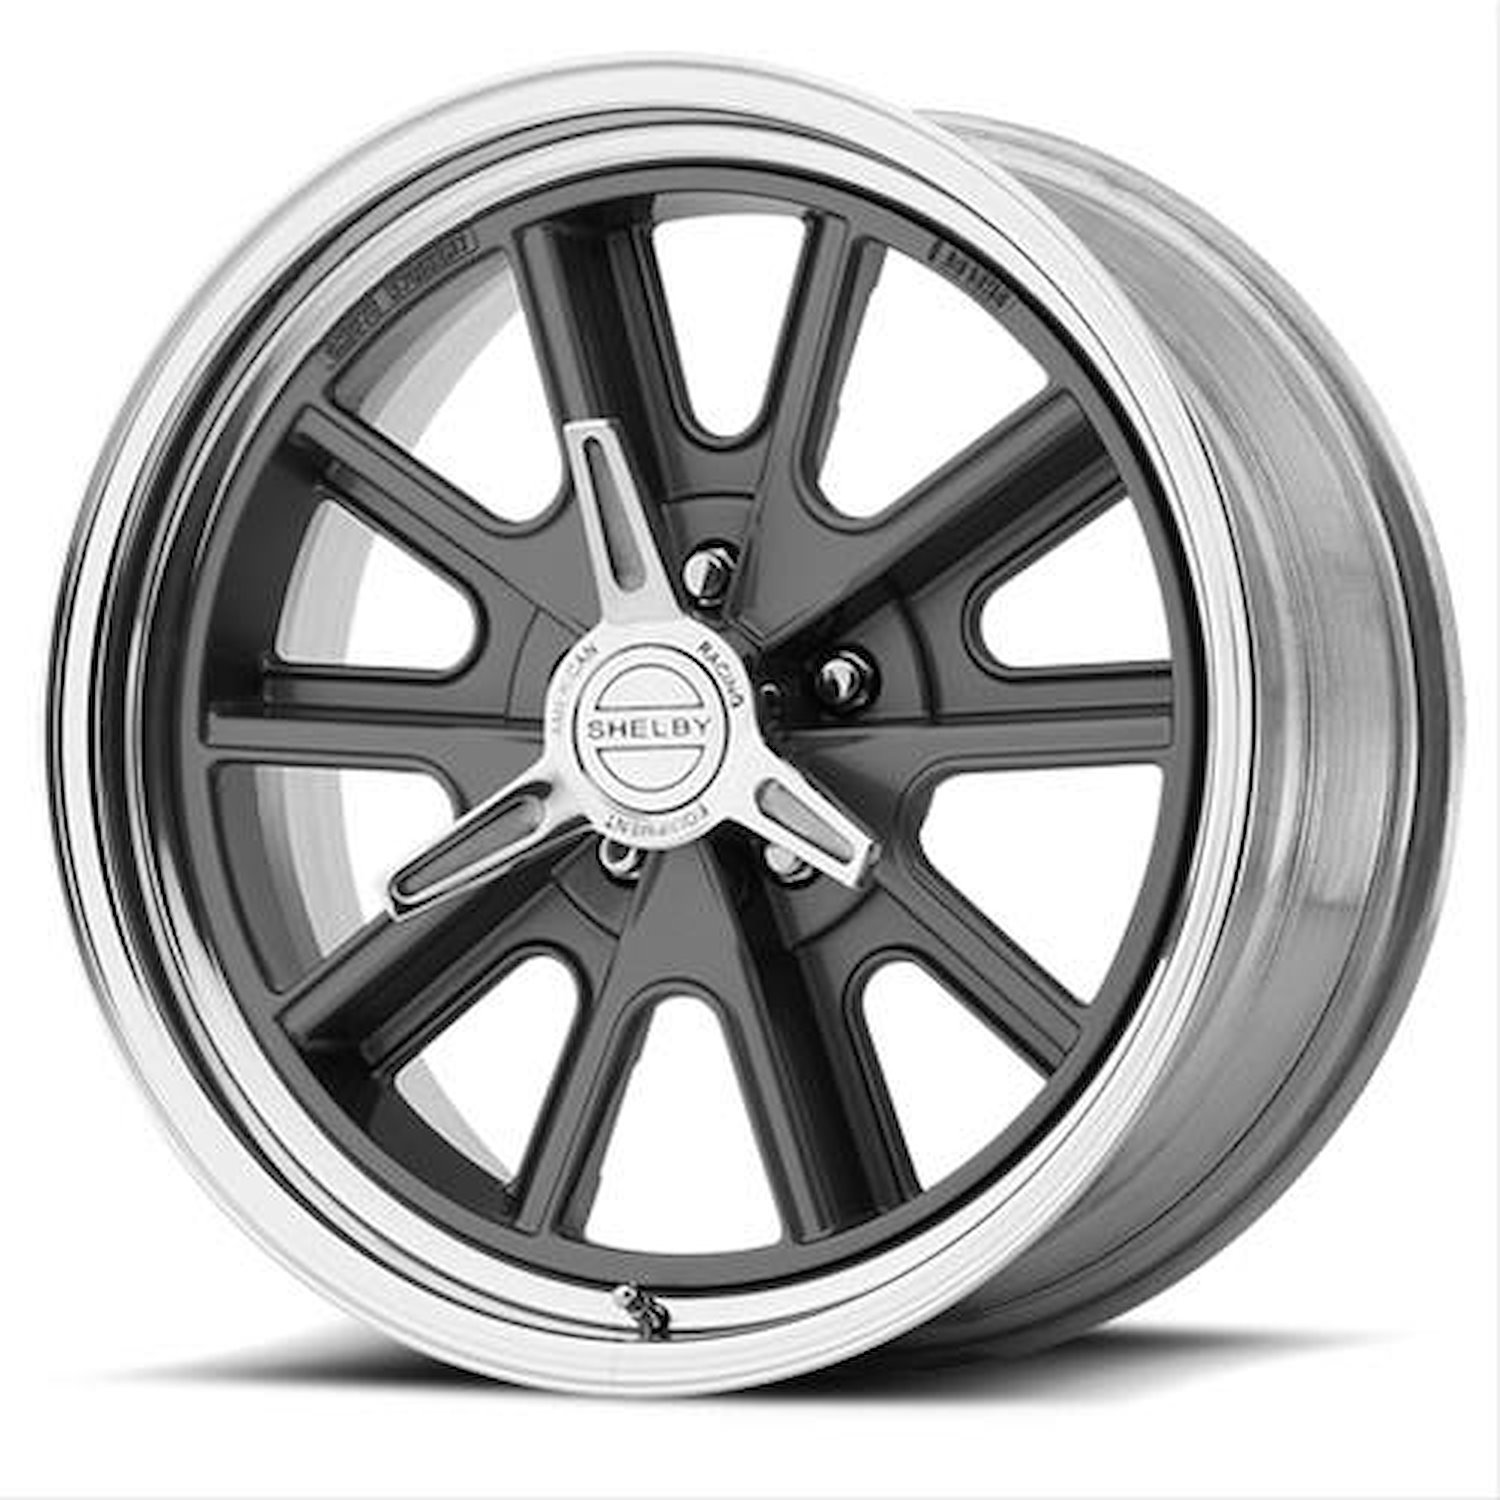 AMERICAN RACING 427 SHELBY COBRA TWO-PIECE MAG GRAY CENTER POLISHED BARREL 15 x 8 5X4.75 -19 3.75